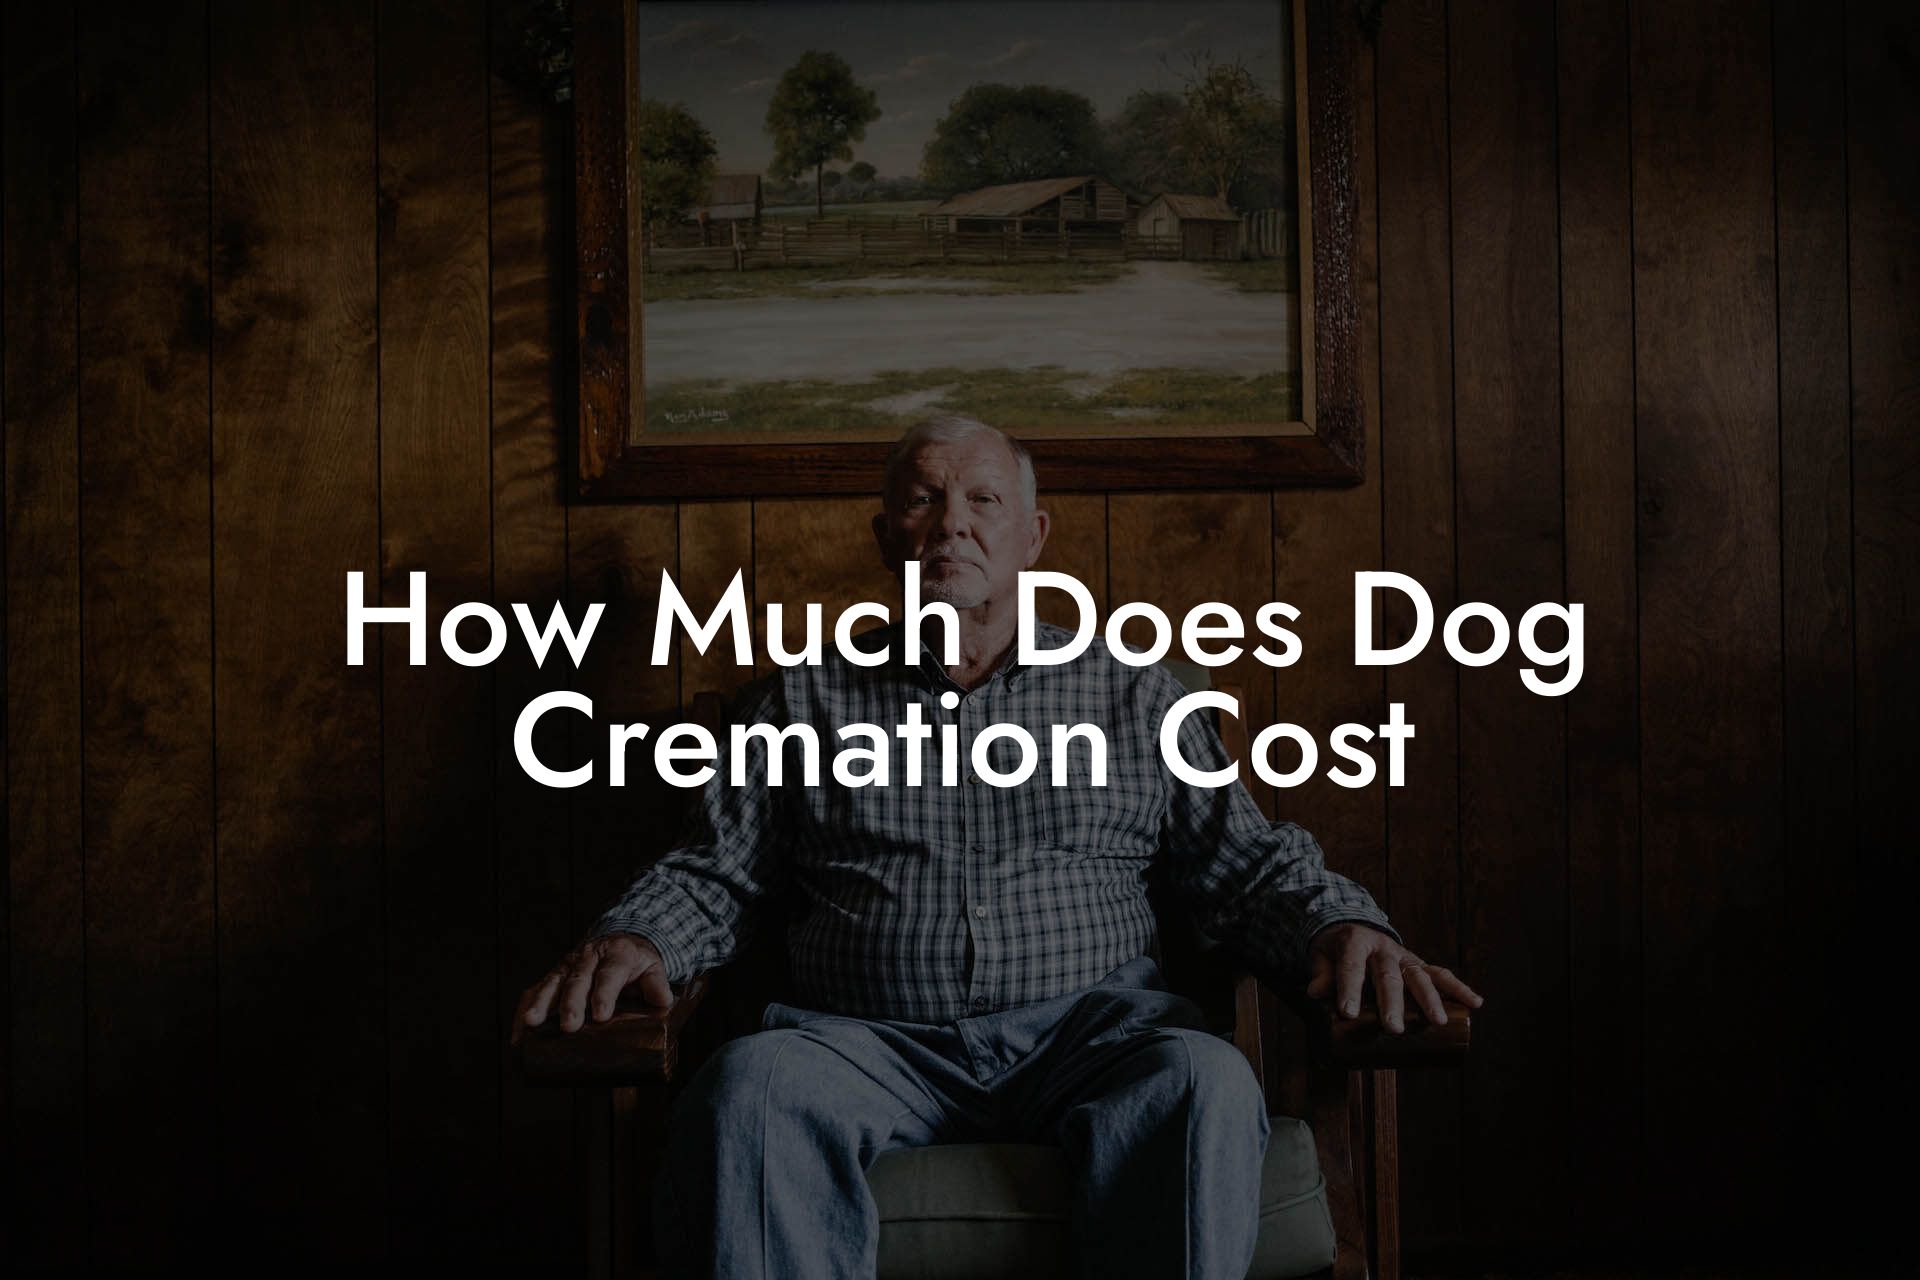 How Much Does Dog Cremation Cost